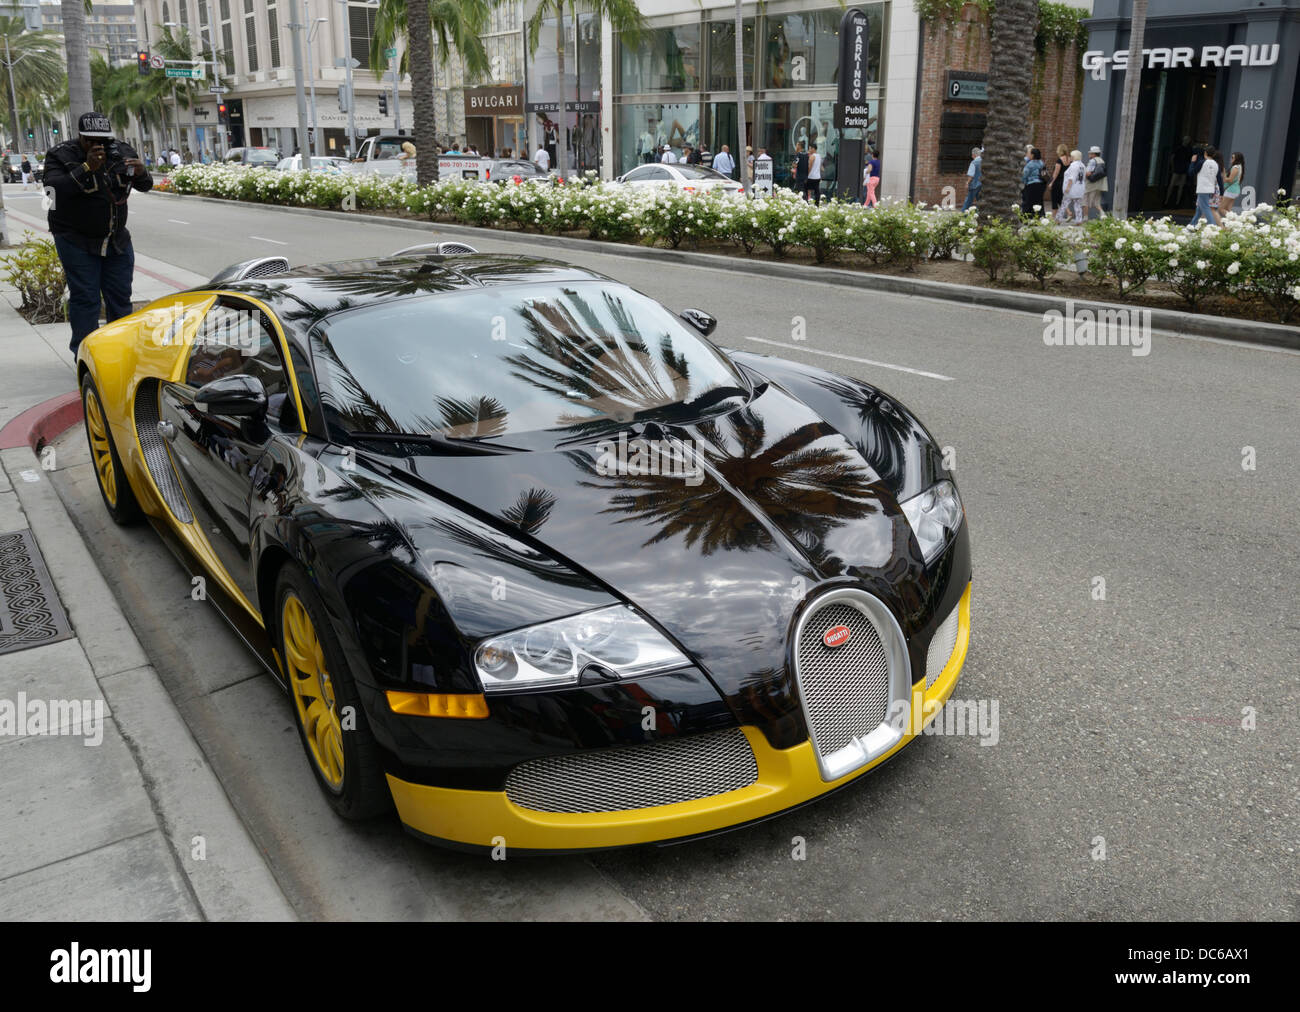 Bugatti Veyron with toursit taking picture, Rodeo Drive, Beverly Hills, CA Stock Photo